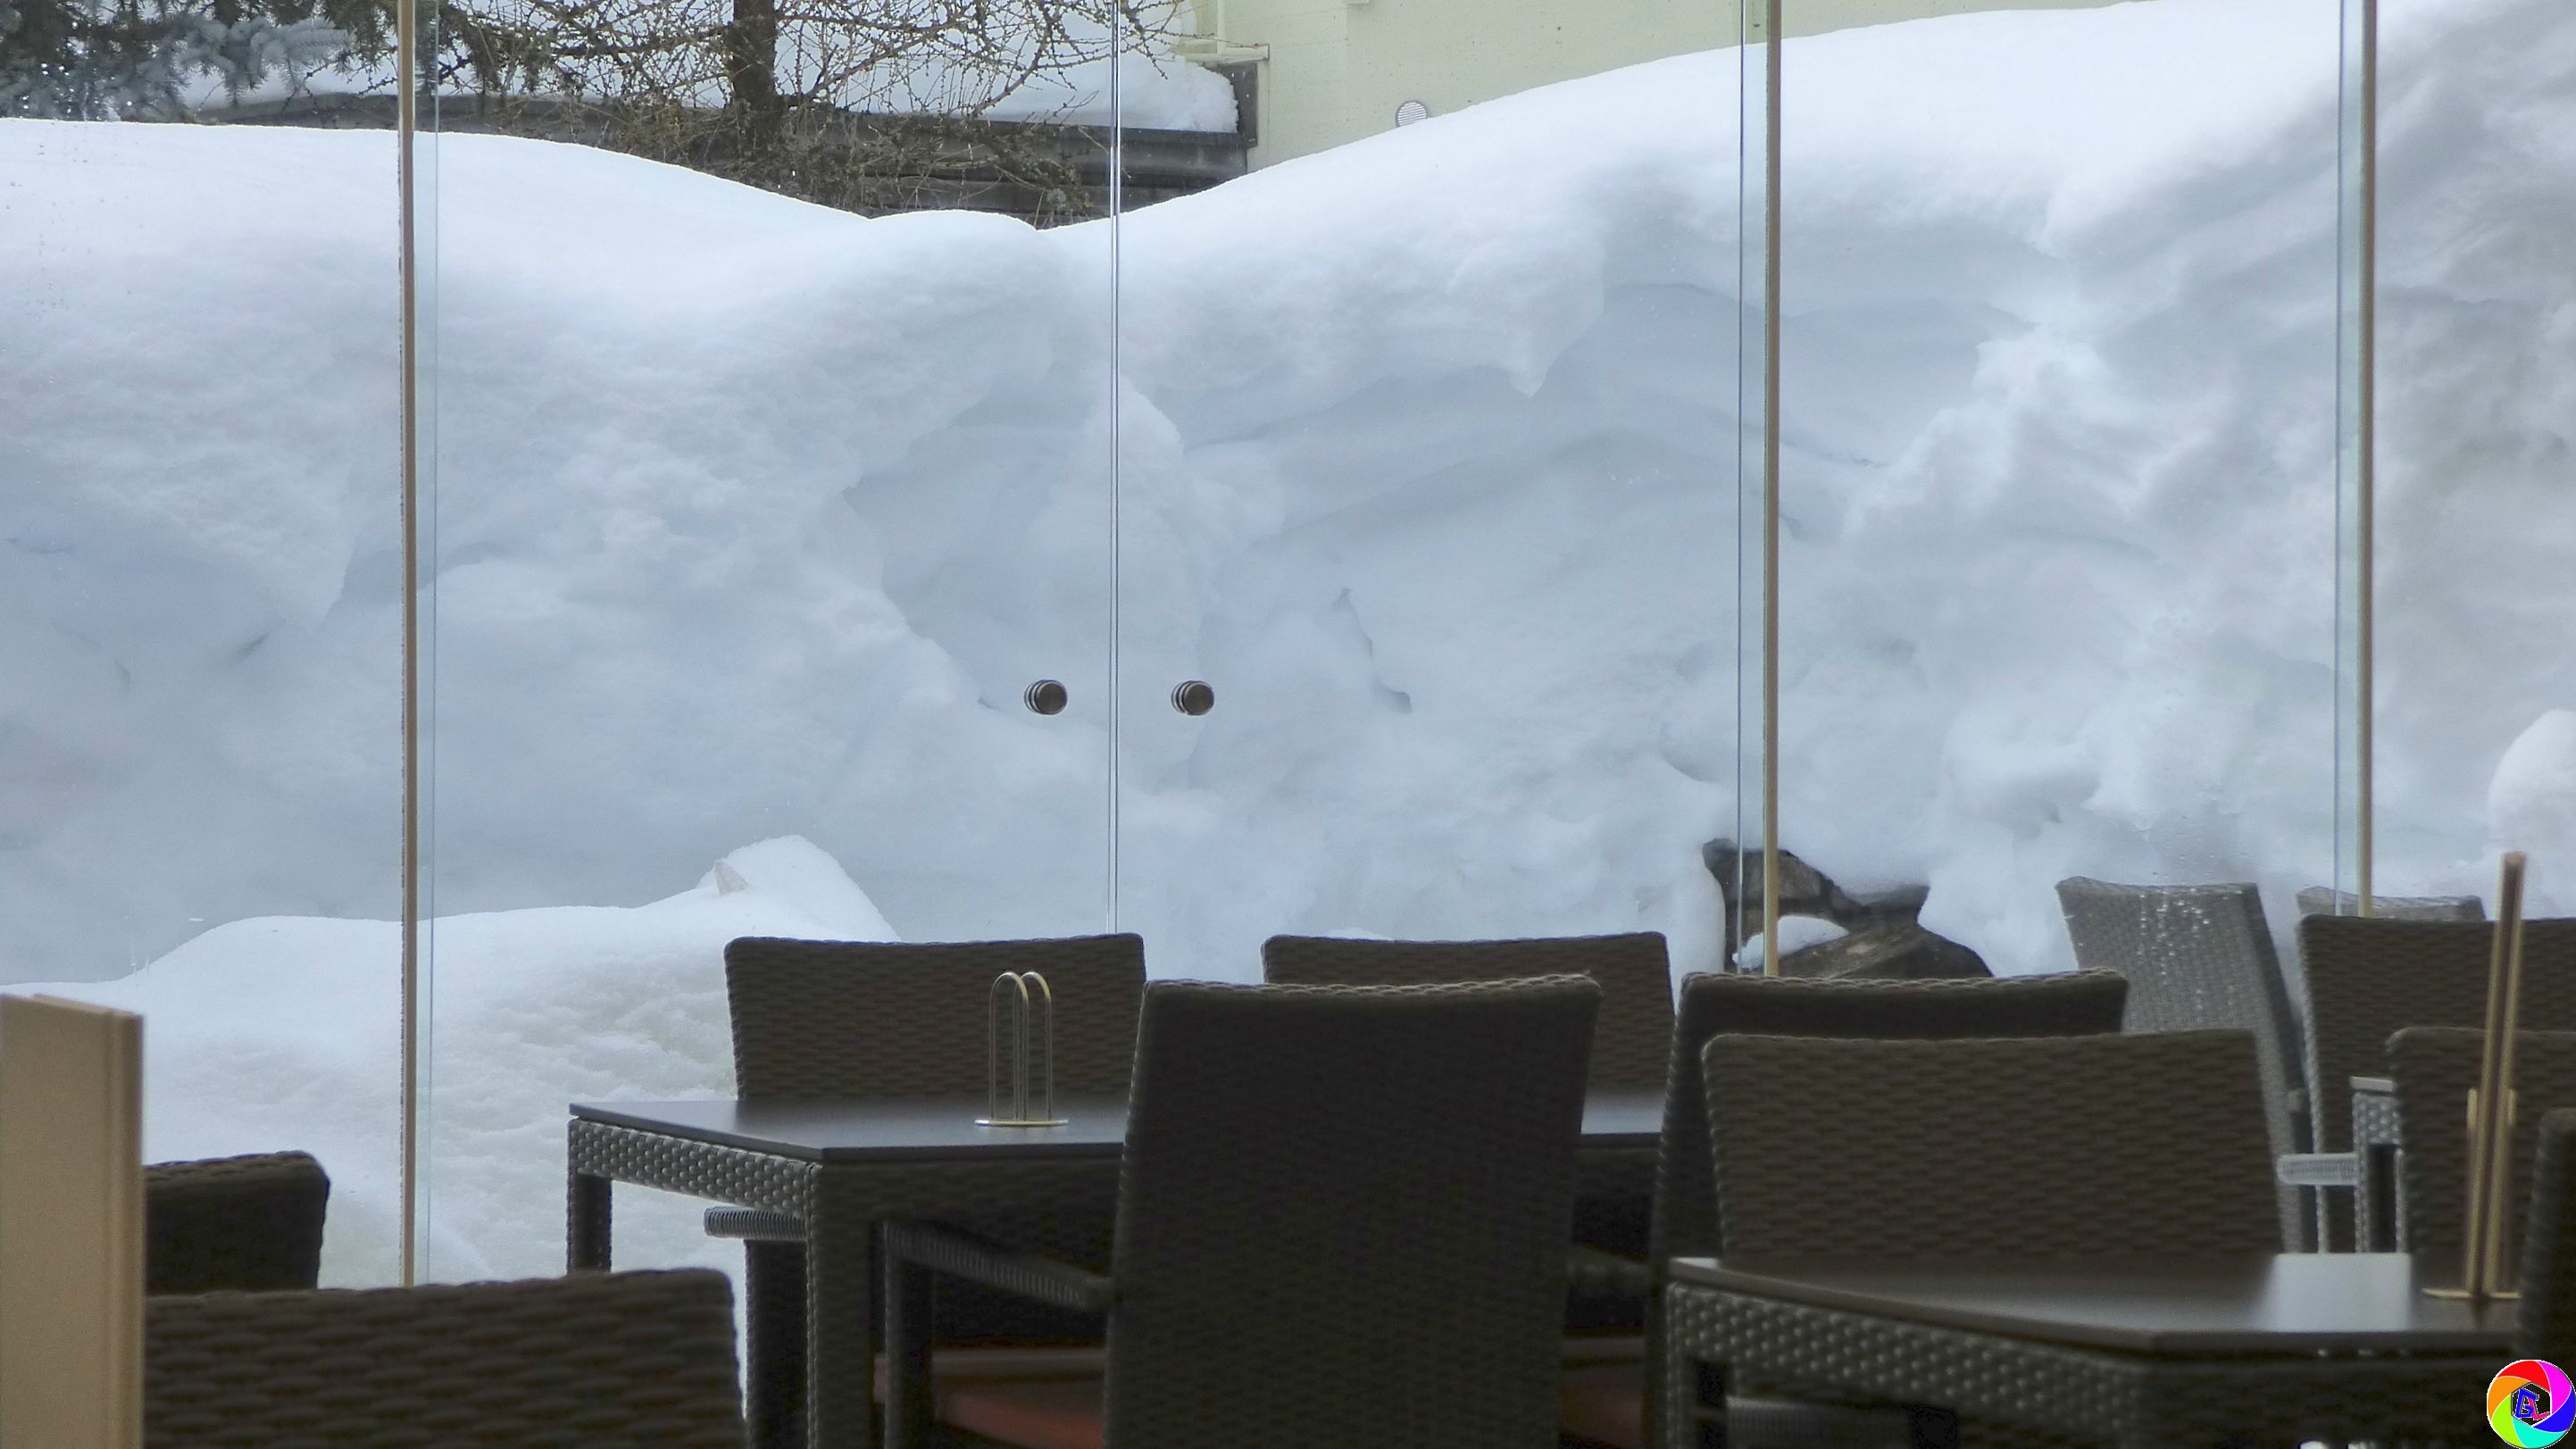 Snow fallen thick on outdoor cafe tables